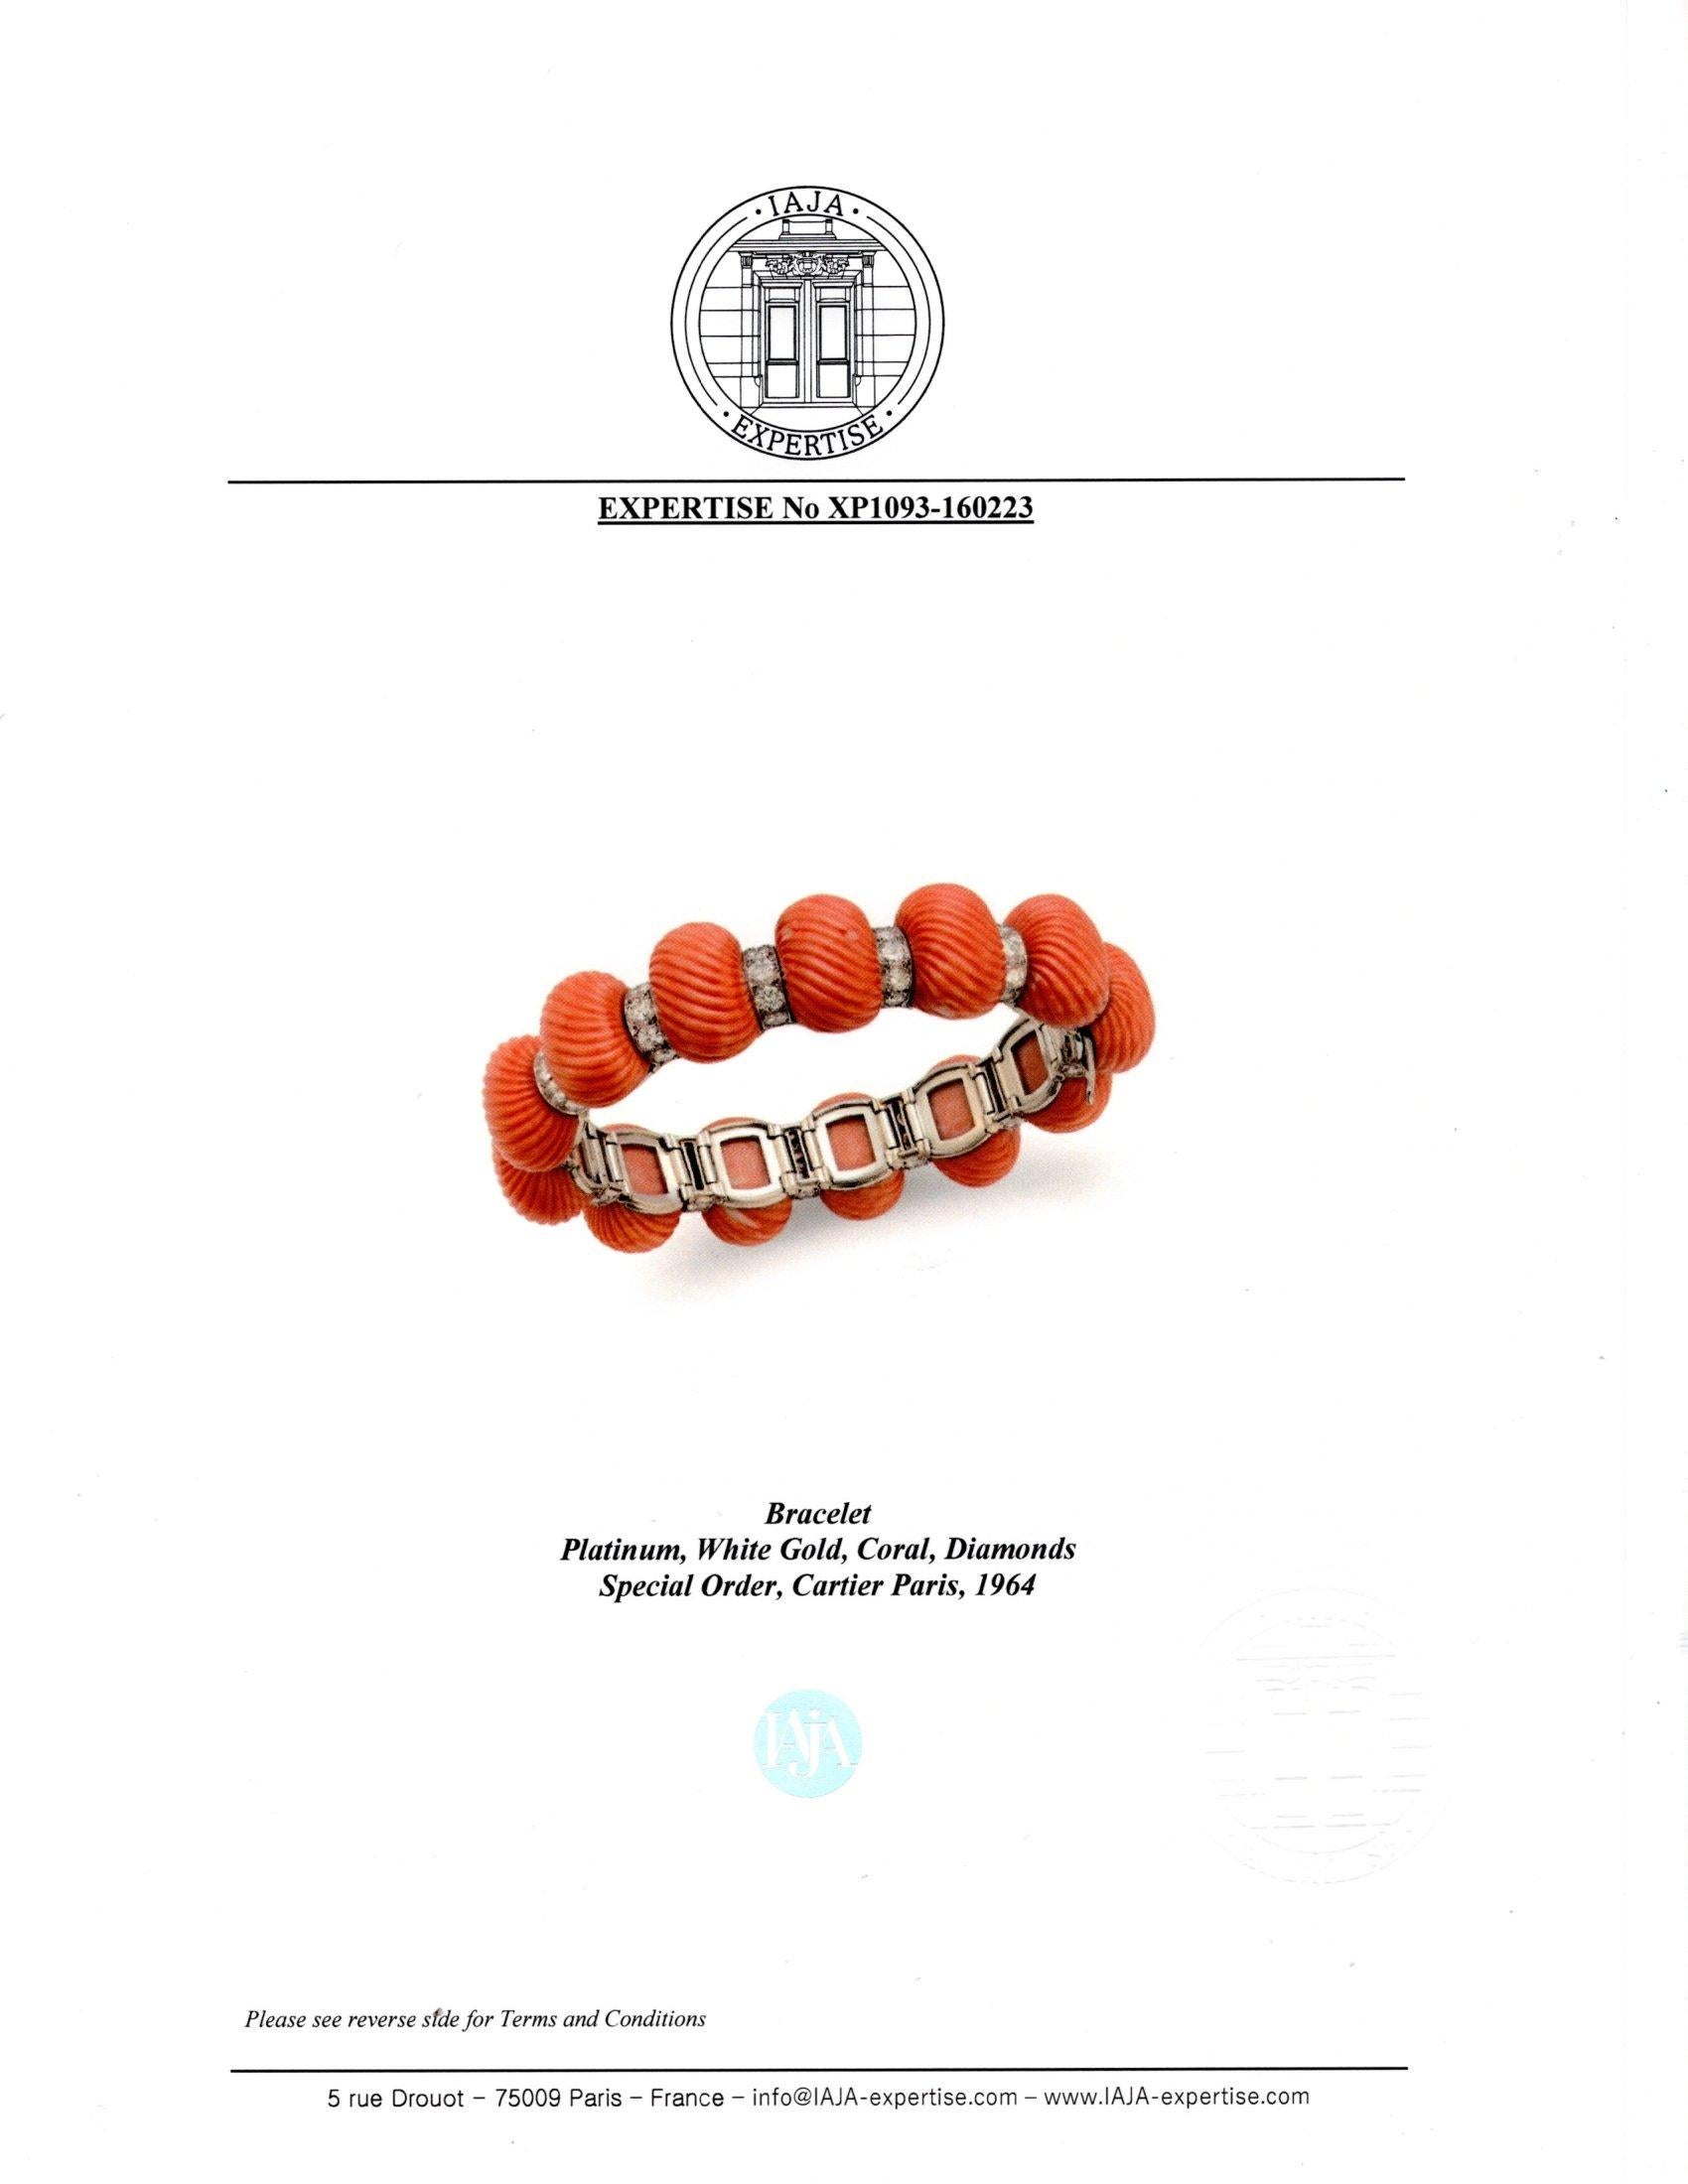 Exceptional Coral and Diamond Bracelet by Cartier 5